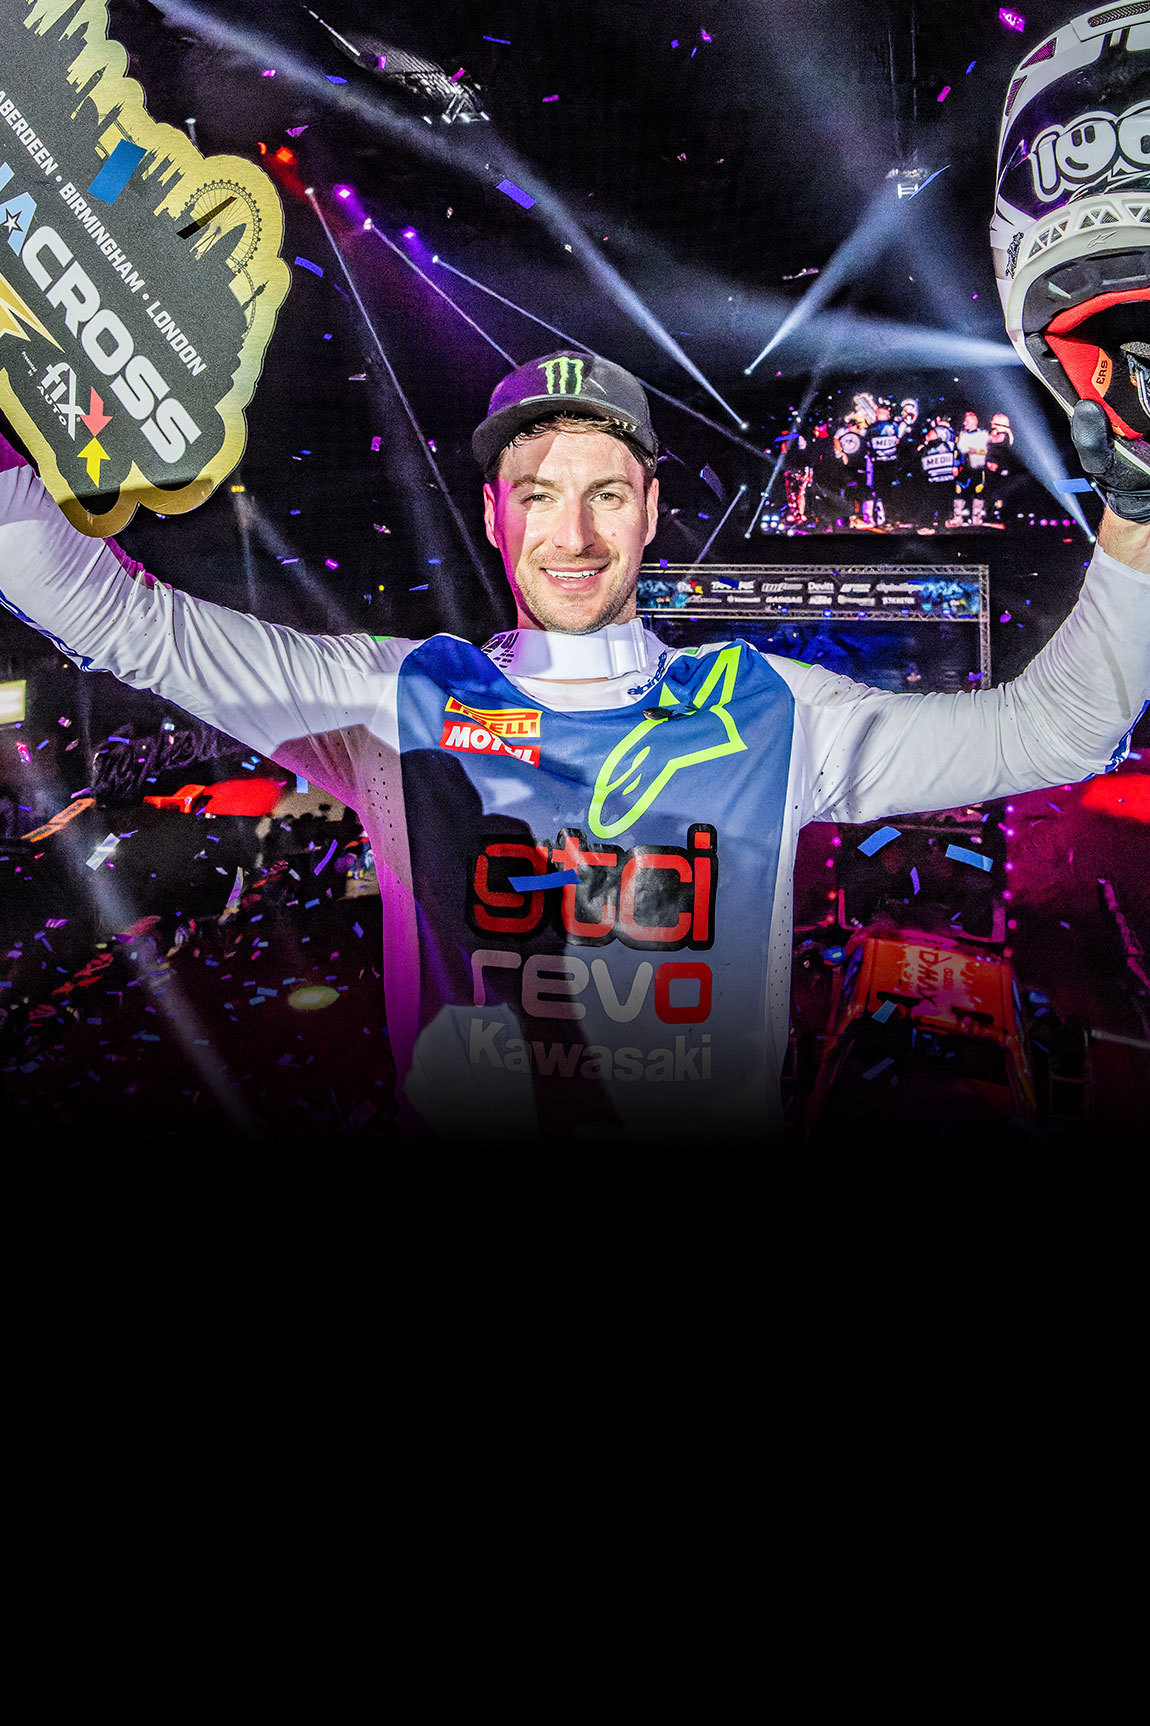 Tommy Crowned Arenacross British Champion